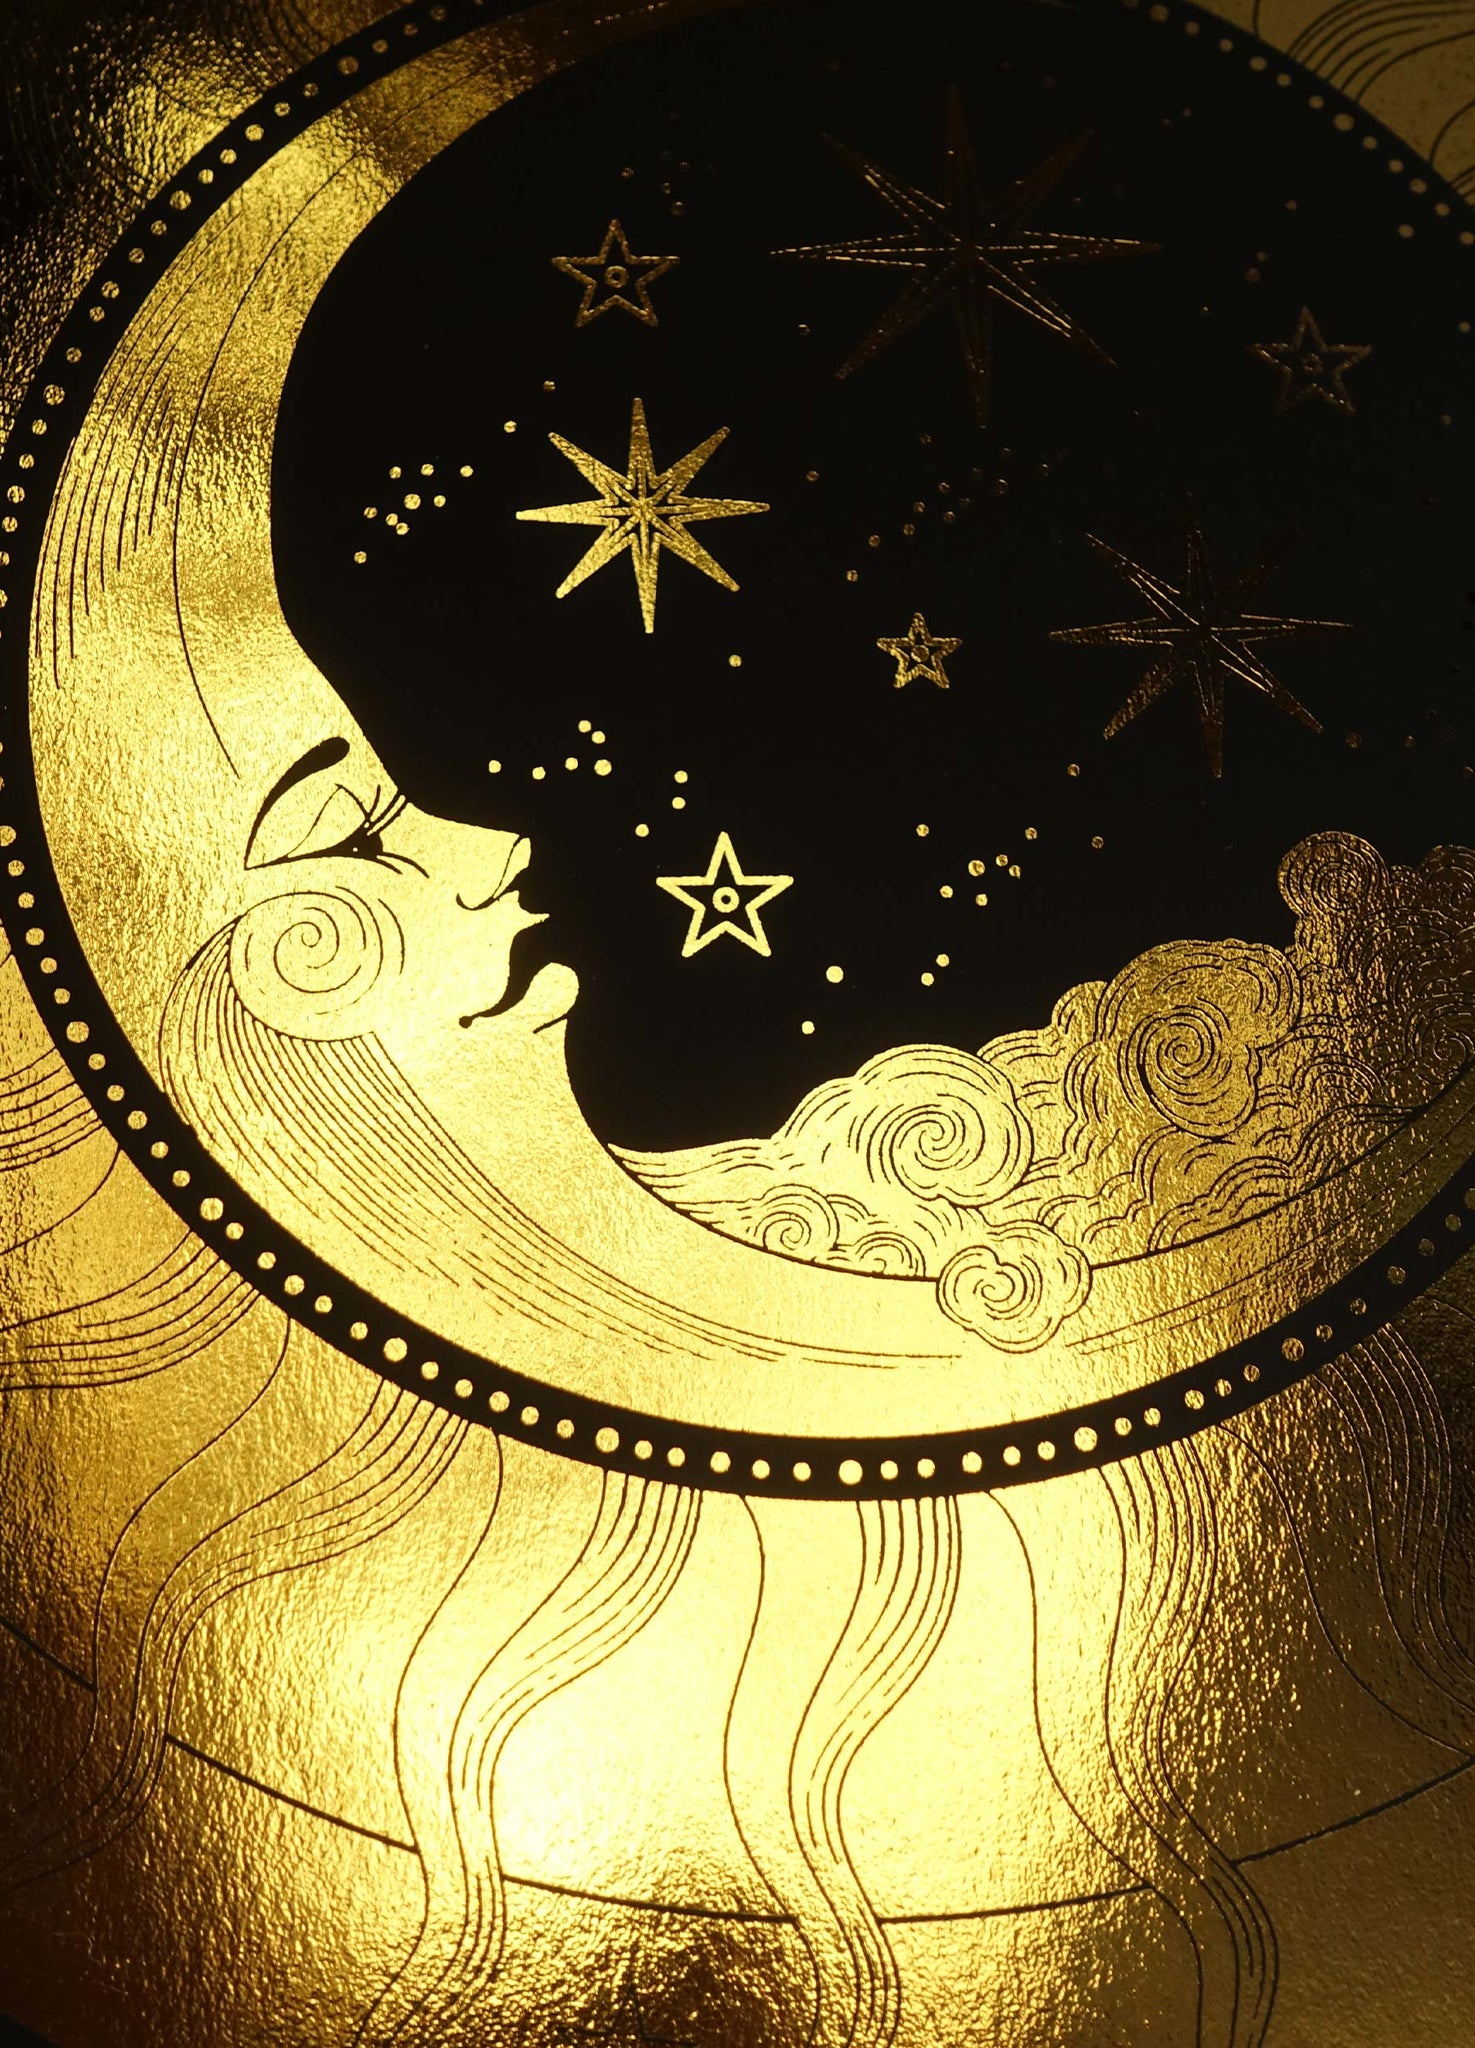 Moon Sky Disk gold foil on black paper art print by Cocorrina & Co